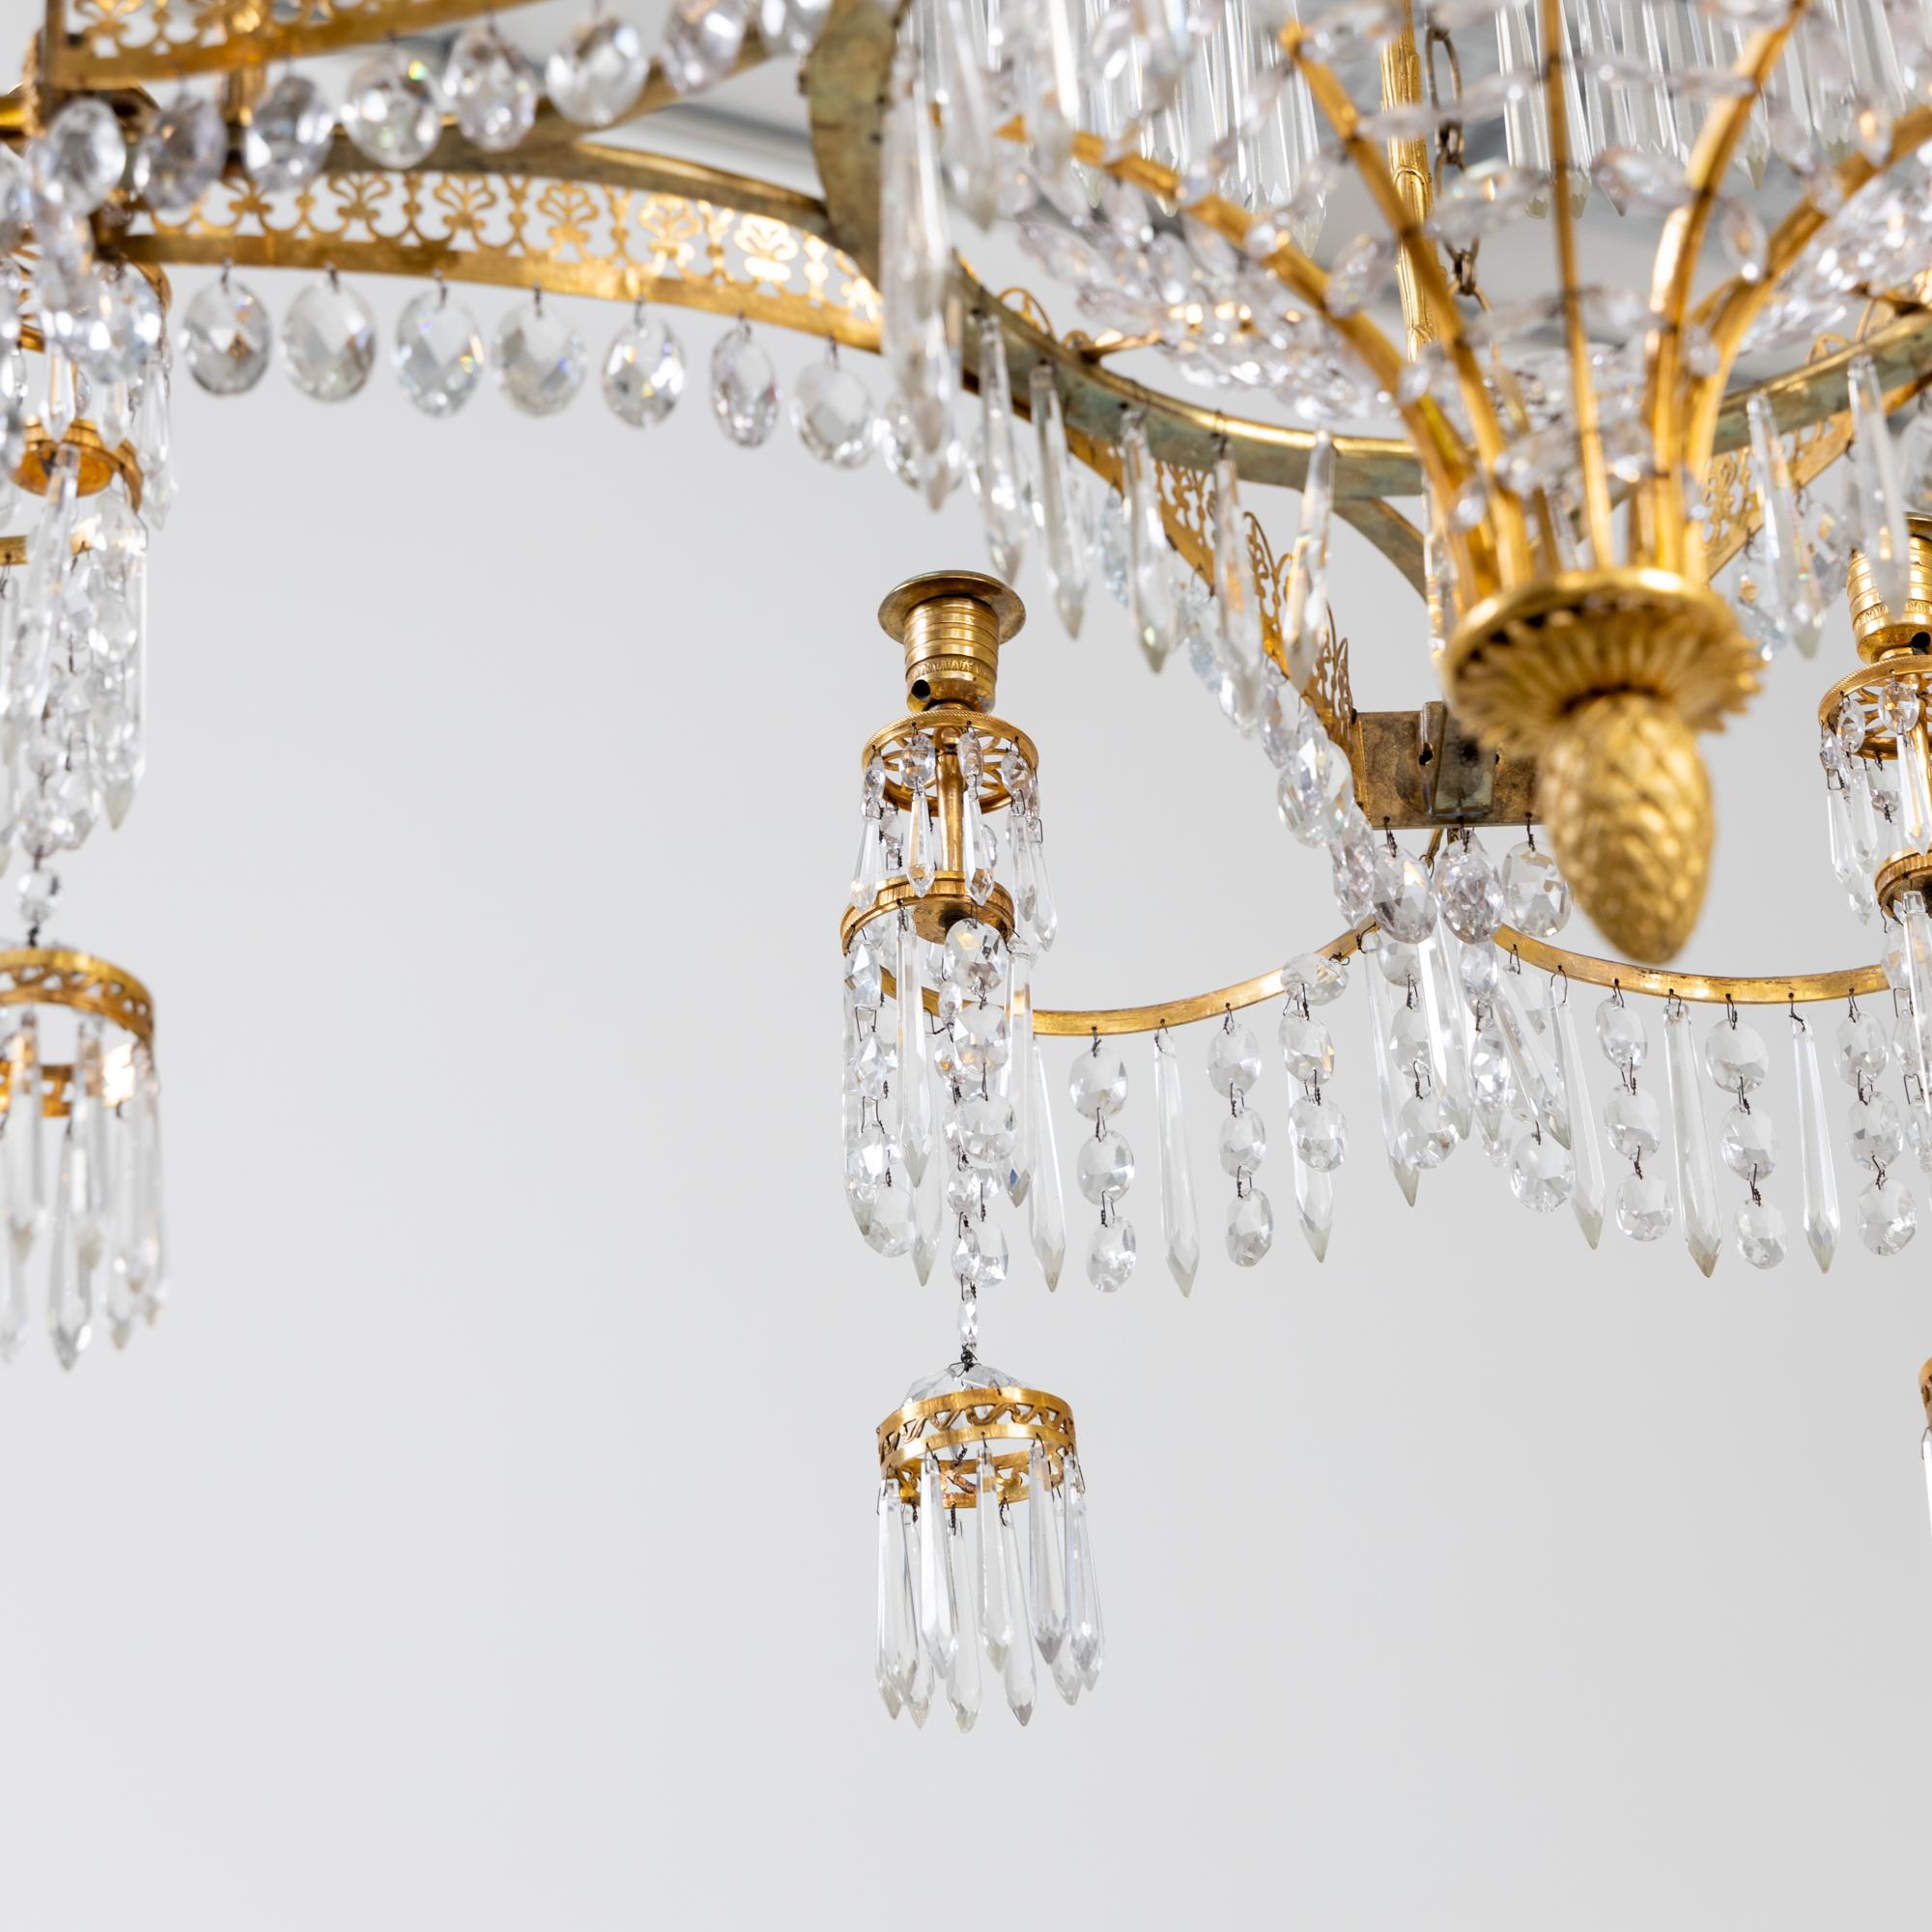 Chandelier with Palm Trees, Werner & Mieth, Berlin c. 1800-1810 For Sale 6